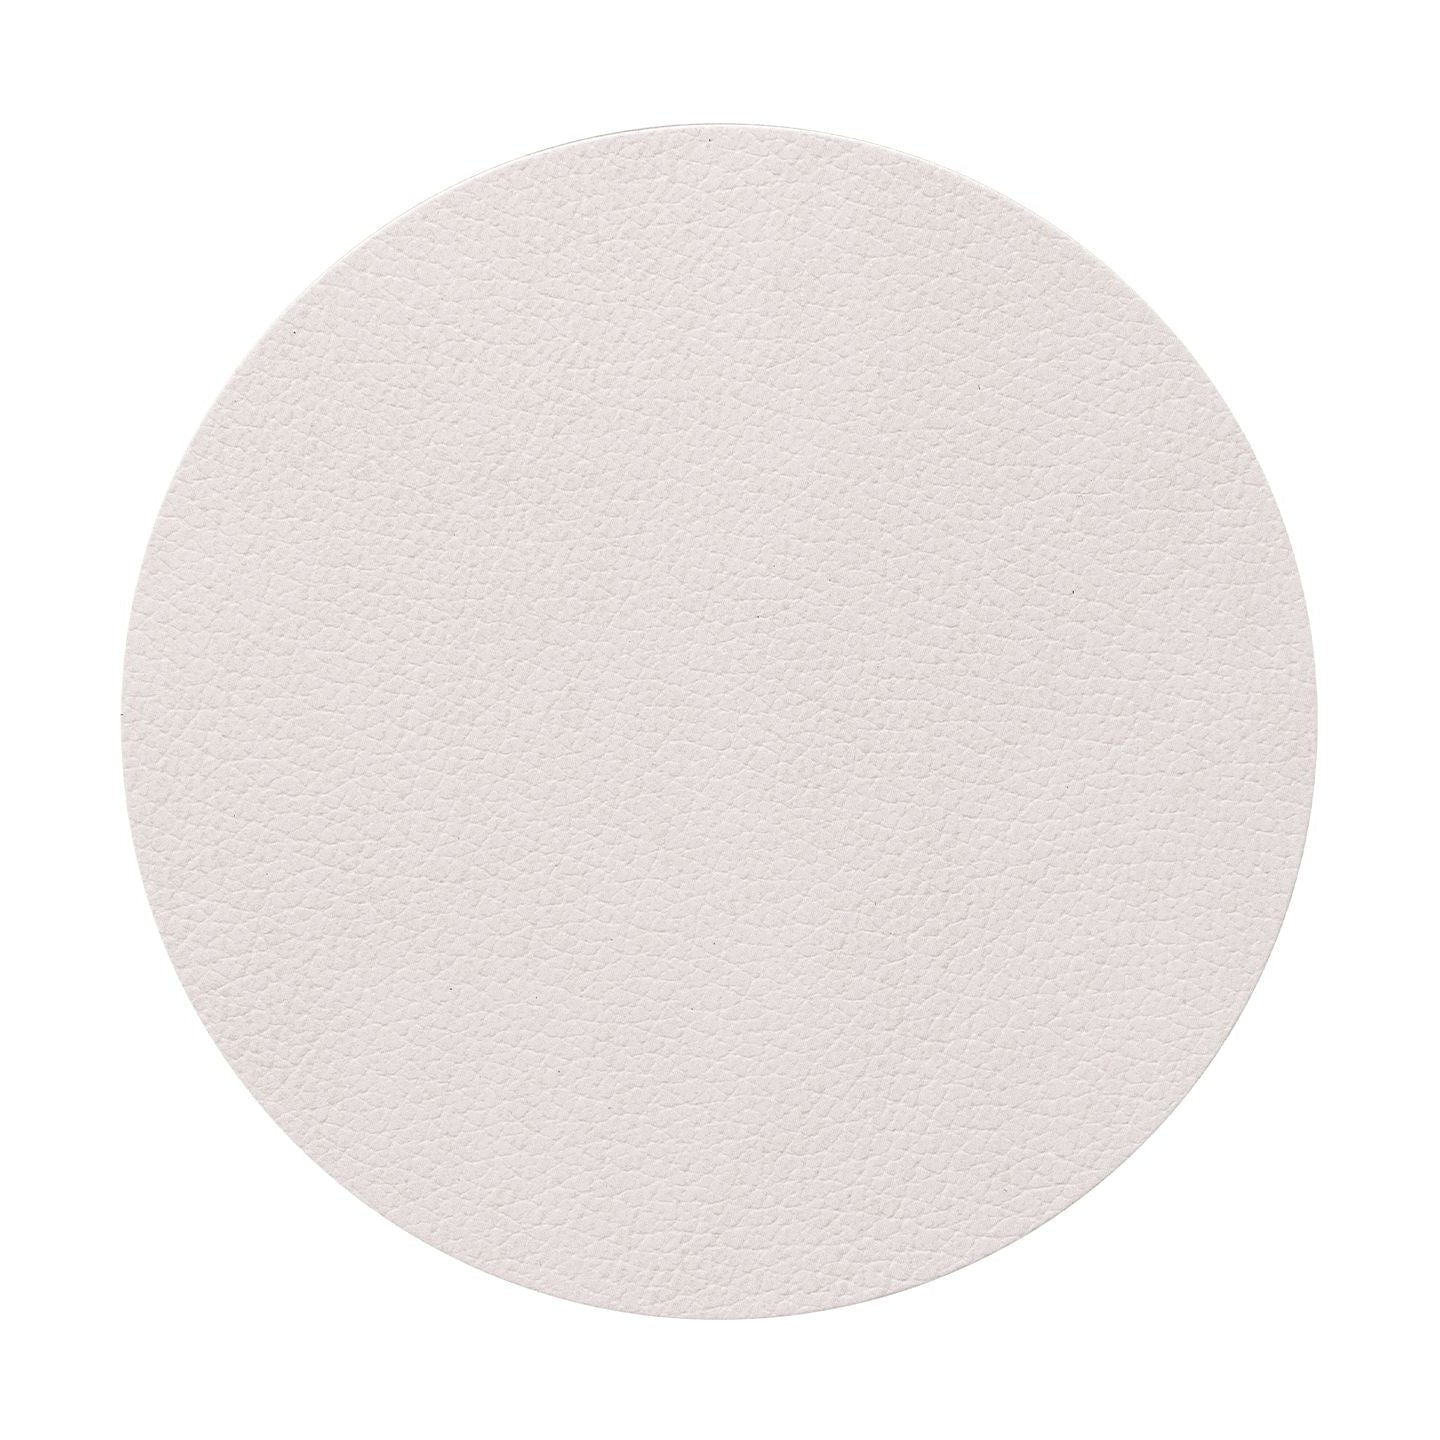 Lind Dna Glas Mat Circle, Oyster White